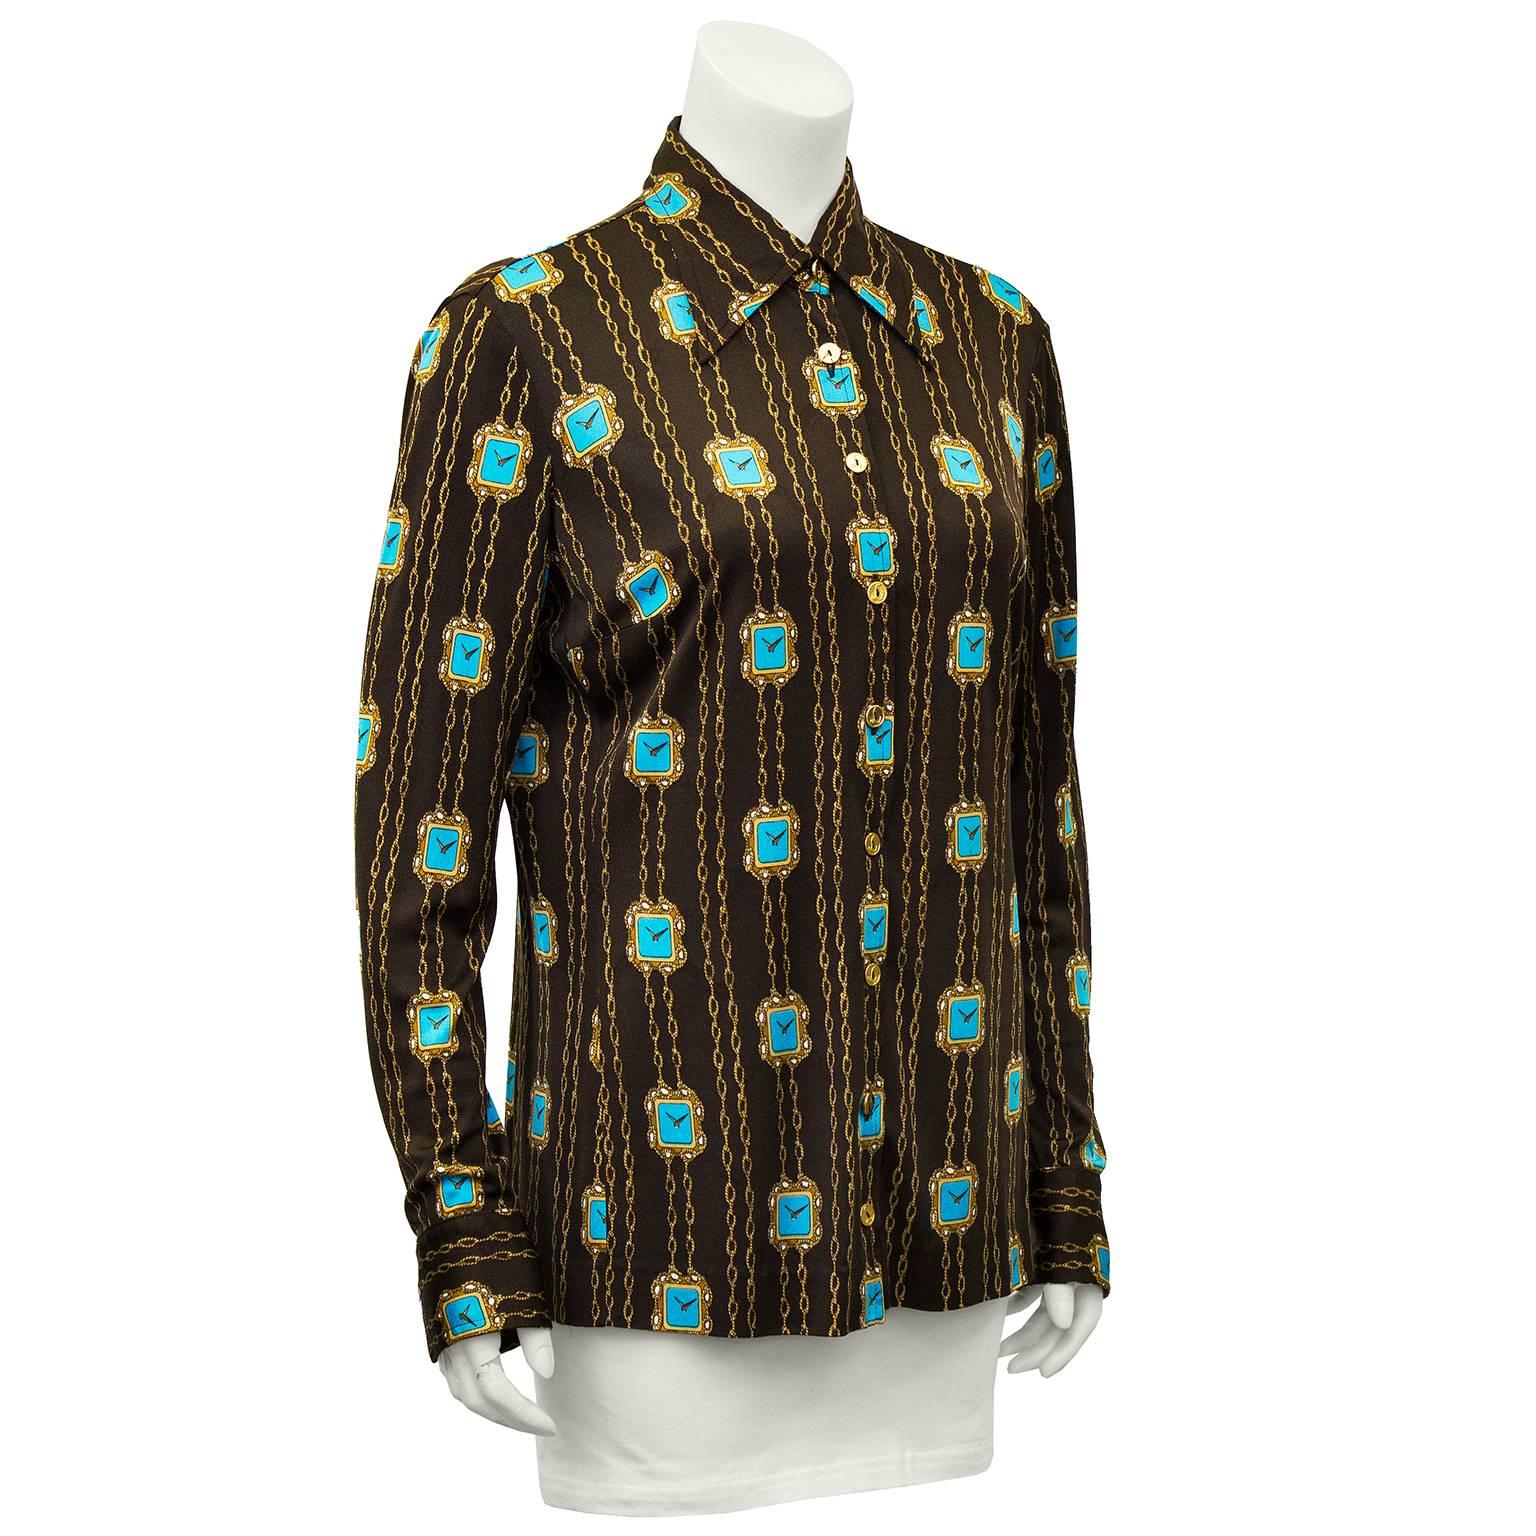 Anonymous 1970's polyester knit blouse. Brown with gold and turquoise chain trimmed clock pattern. Small gold buttons with L monogram could be attributed to Lancel. Excellent vintage condition. Fits like s US 4/6. 

Sleeve 19.5" Shoulder